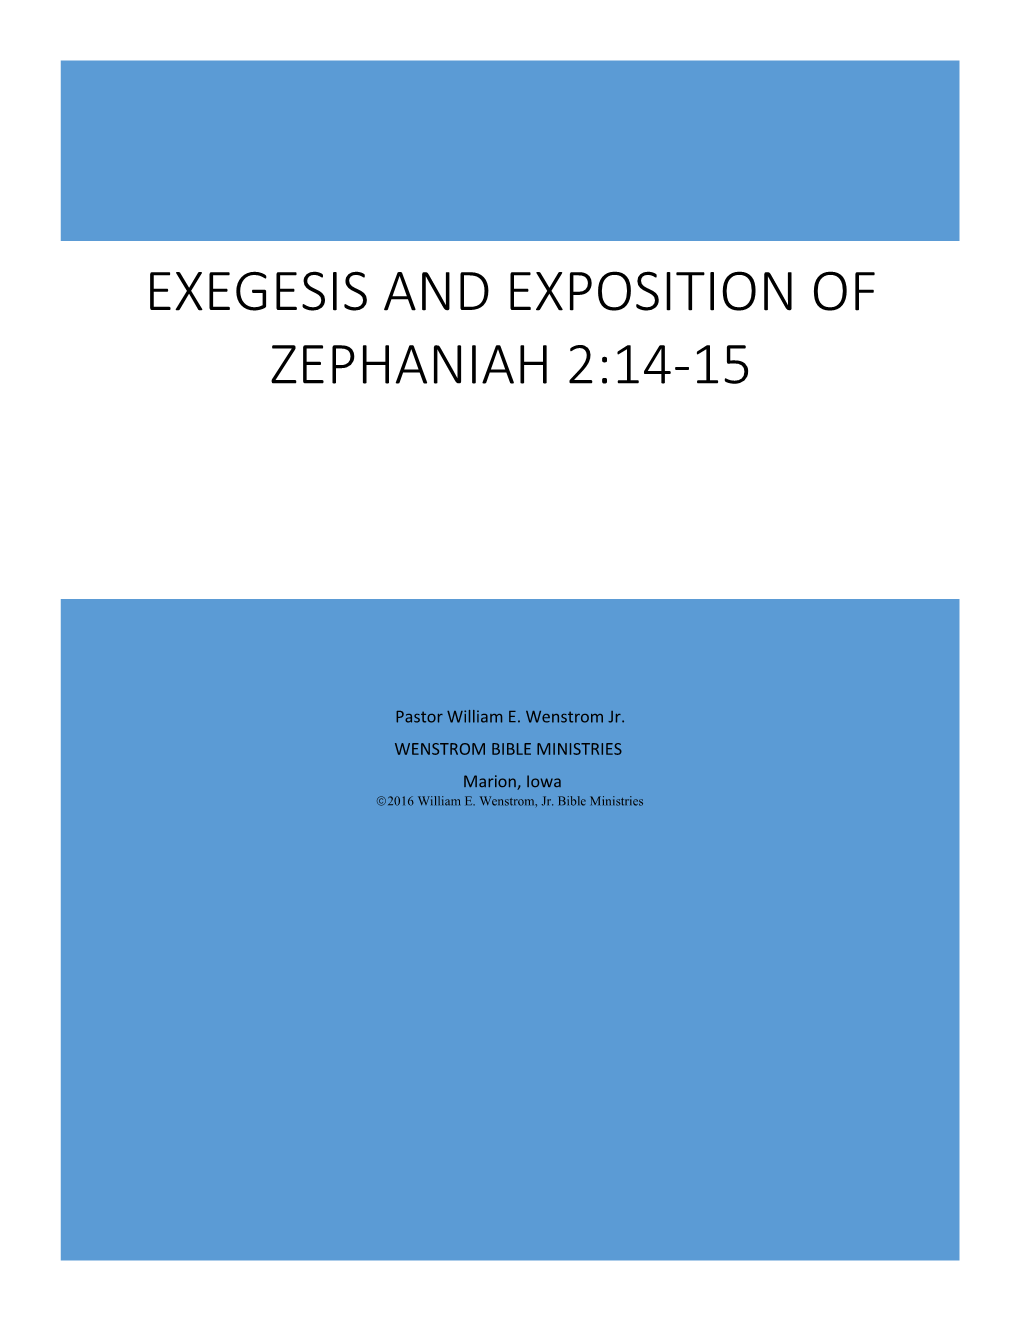 Exegesis and Exposition of Zephaniah 2:14-15